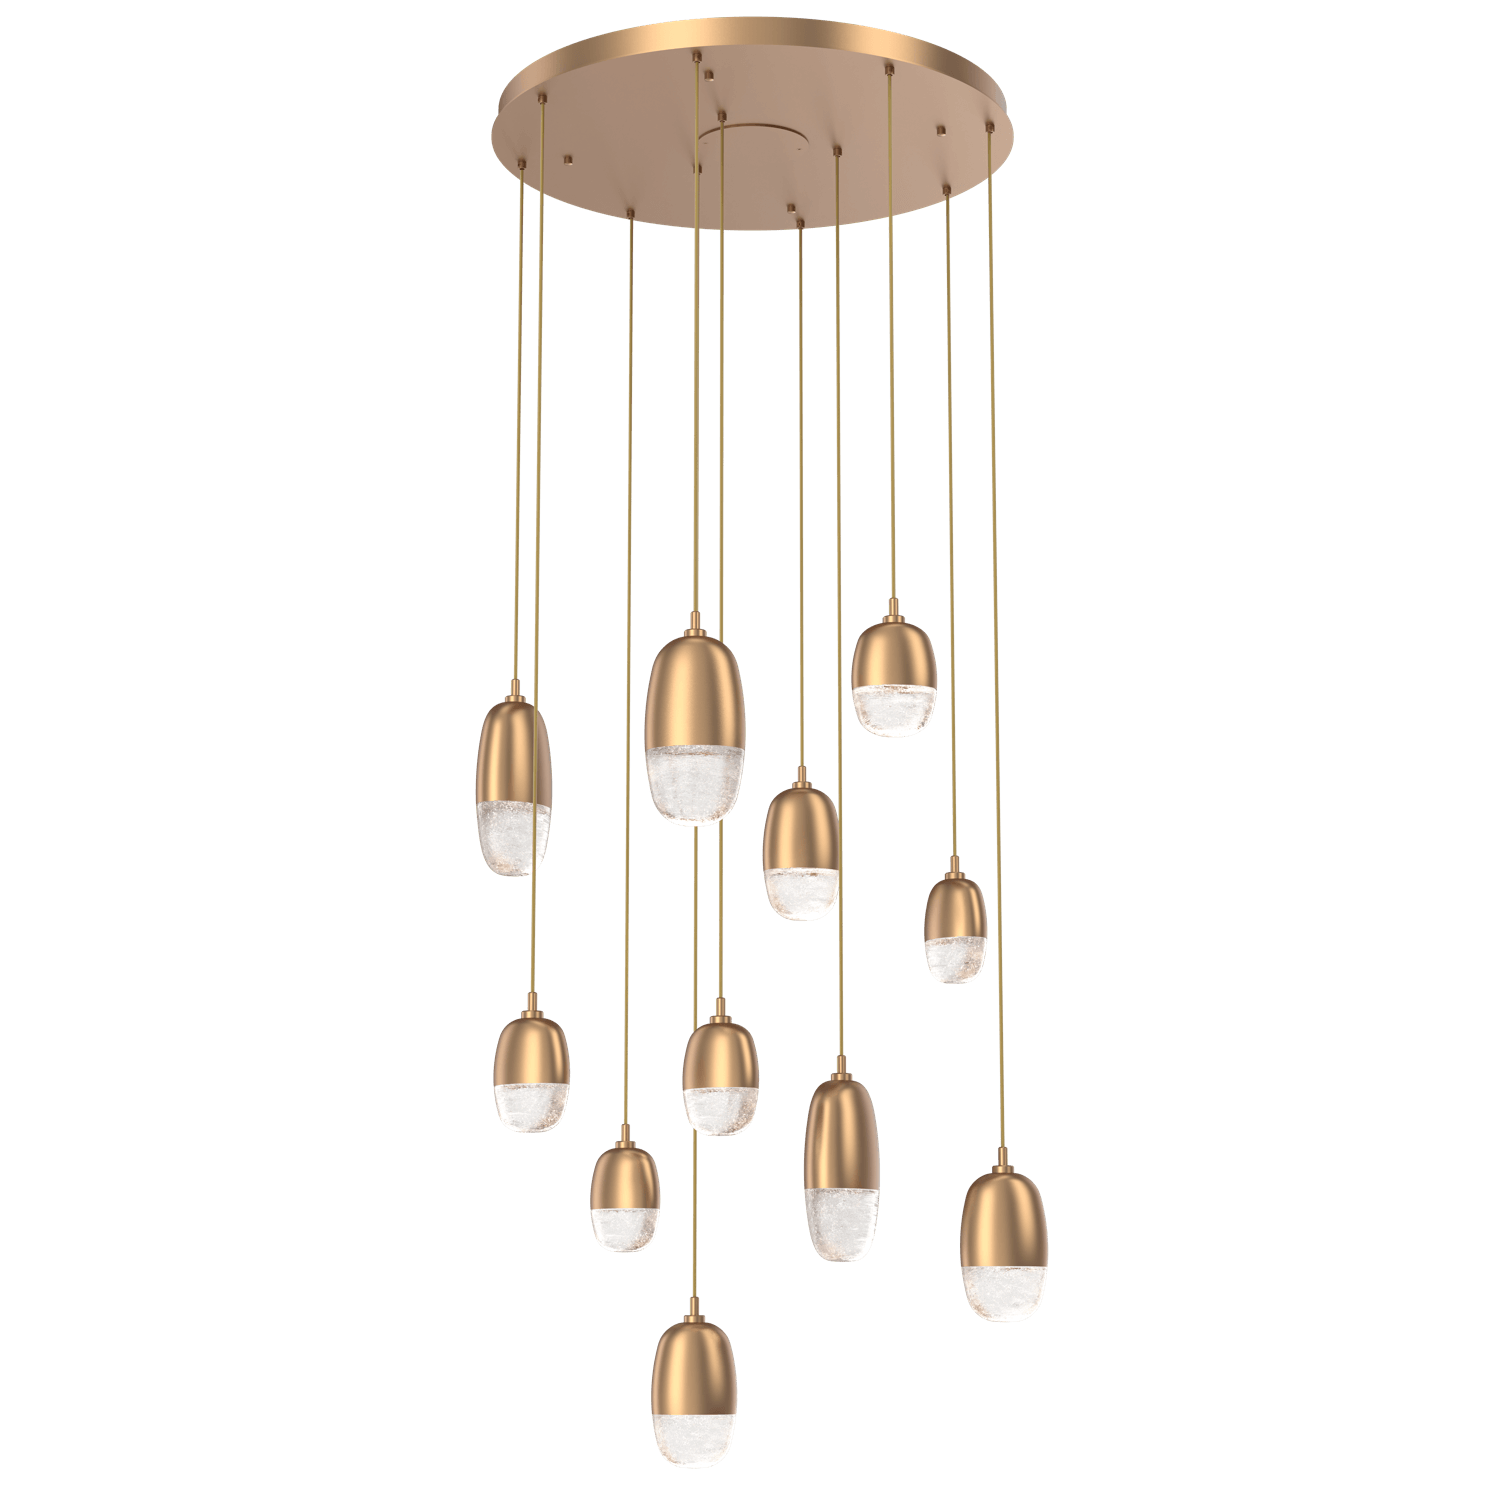 CHB0079-11-NB-Hammerton-Studio-Pebble-11-light-round-pendant-chandelier-with-novel-brass-finish-and-clear-cast-glass-shades-and-LED-lamping